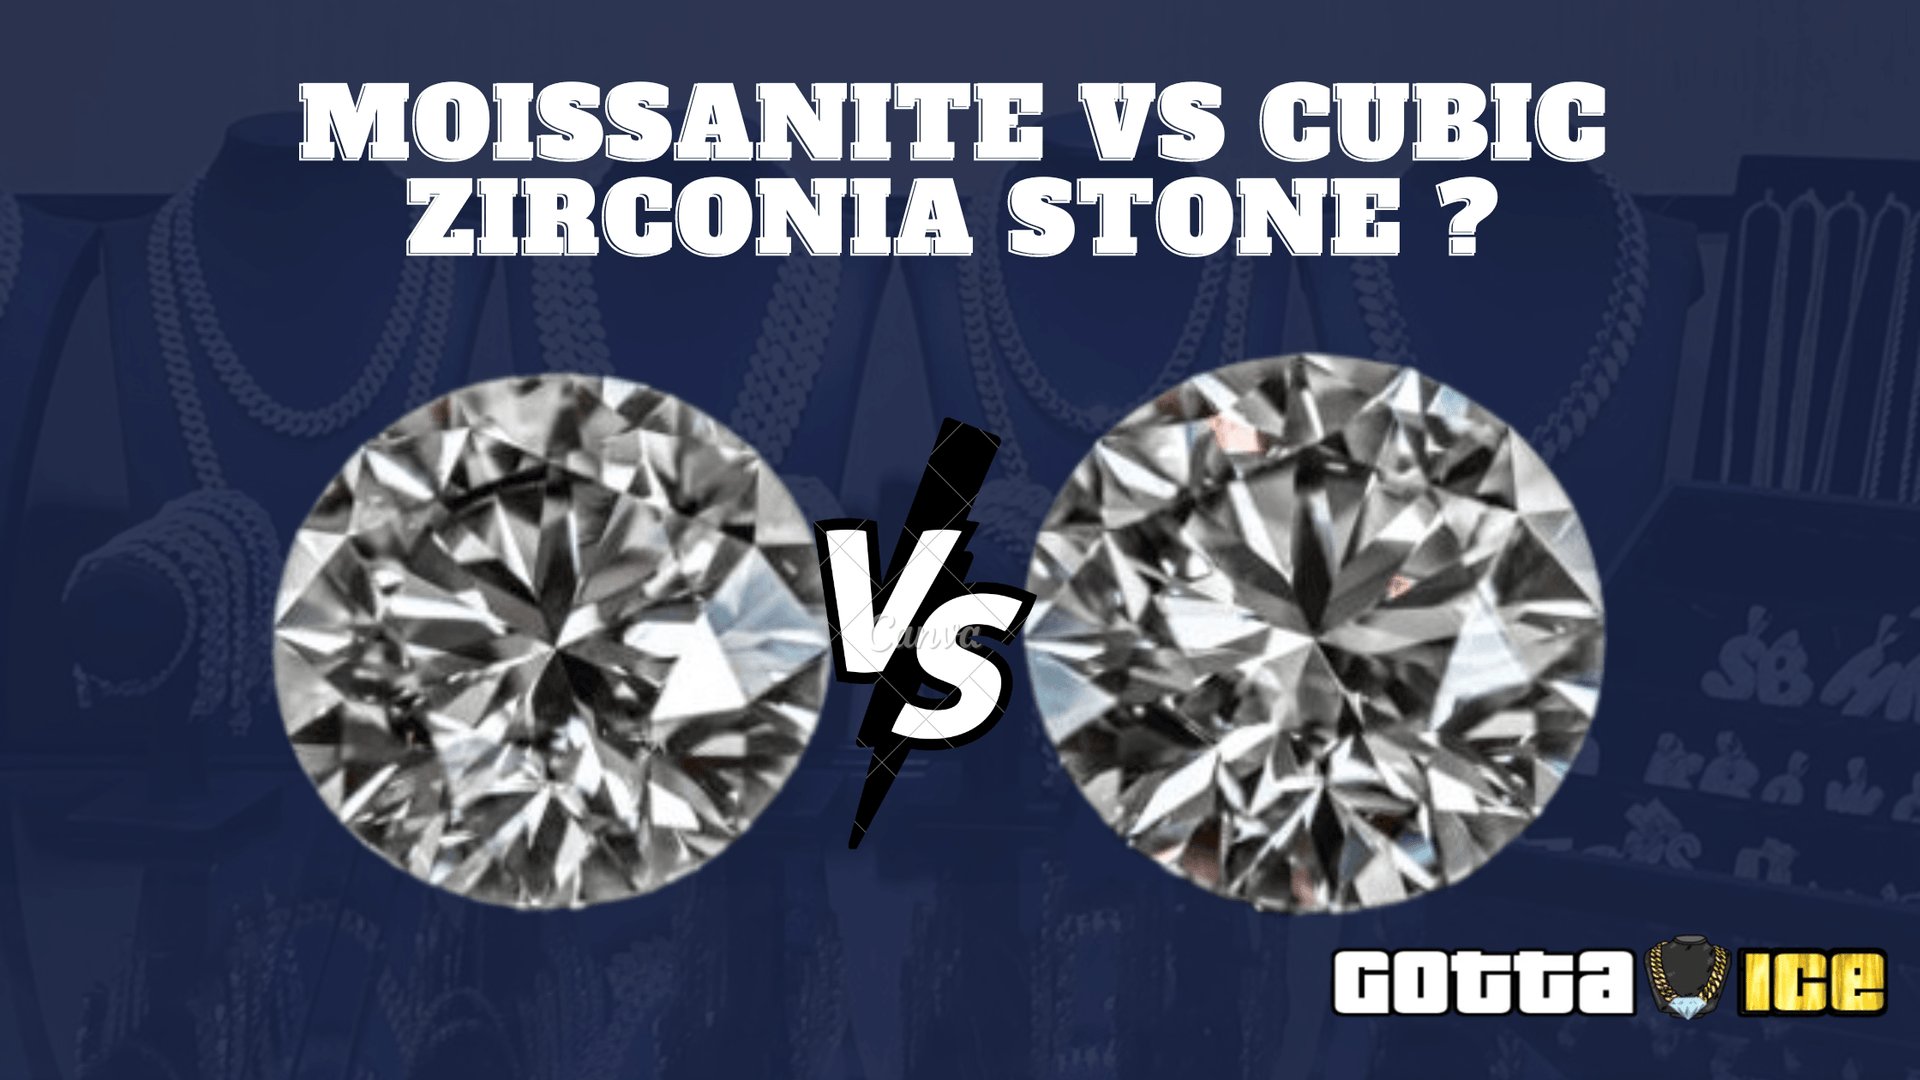 Which Is Better Moissanite Or Cubic Zirconia Stone ? | GottaIce